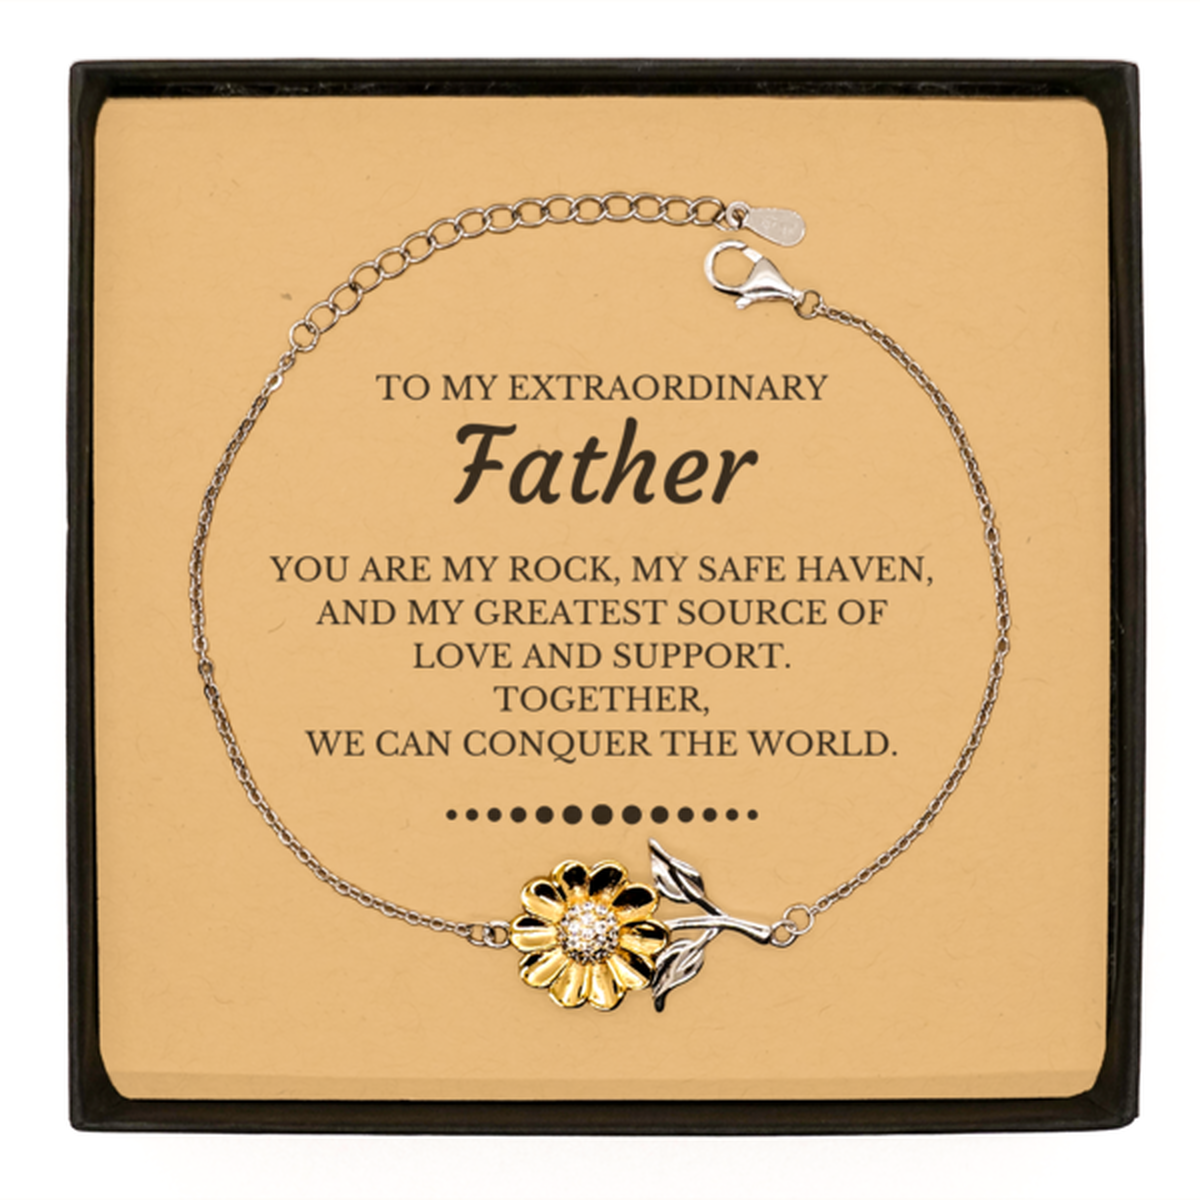 To My Extraordinary Father Gifts, Together, we can conquer the world, Birthday Sunflower Bracelet For Father, Christmas Gifts For Father